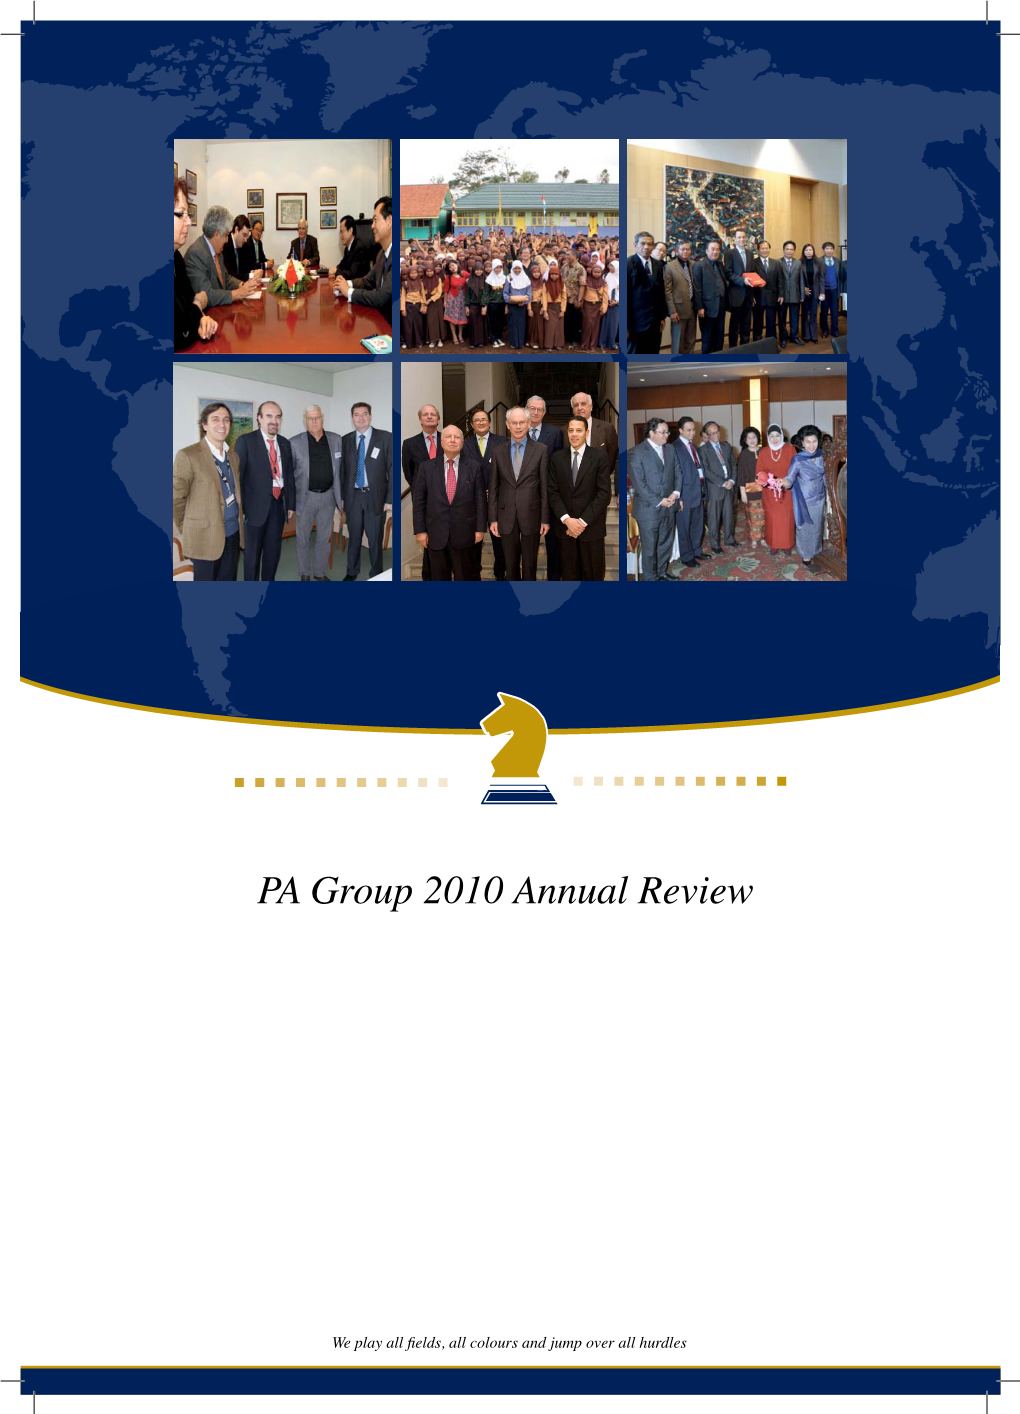 PA Group 2010 Annual Review